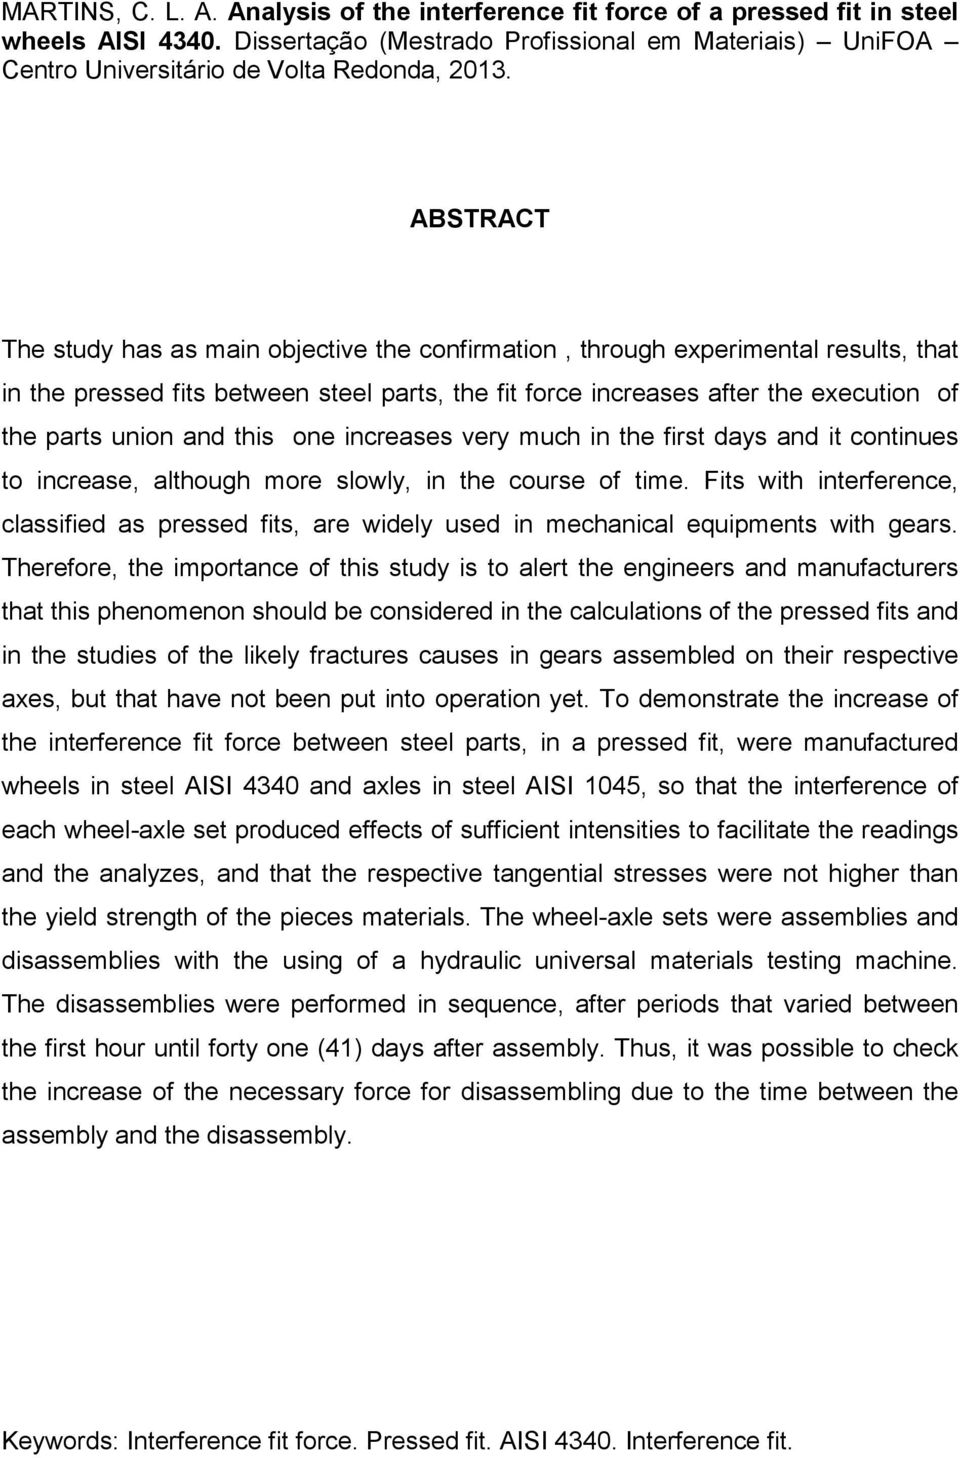 ABSTRACT The study has as main objective the confirmation, through experimental results, that in the pressed fits between steel parts, the fit force increases after the execution of the parts union